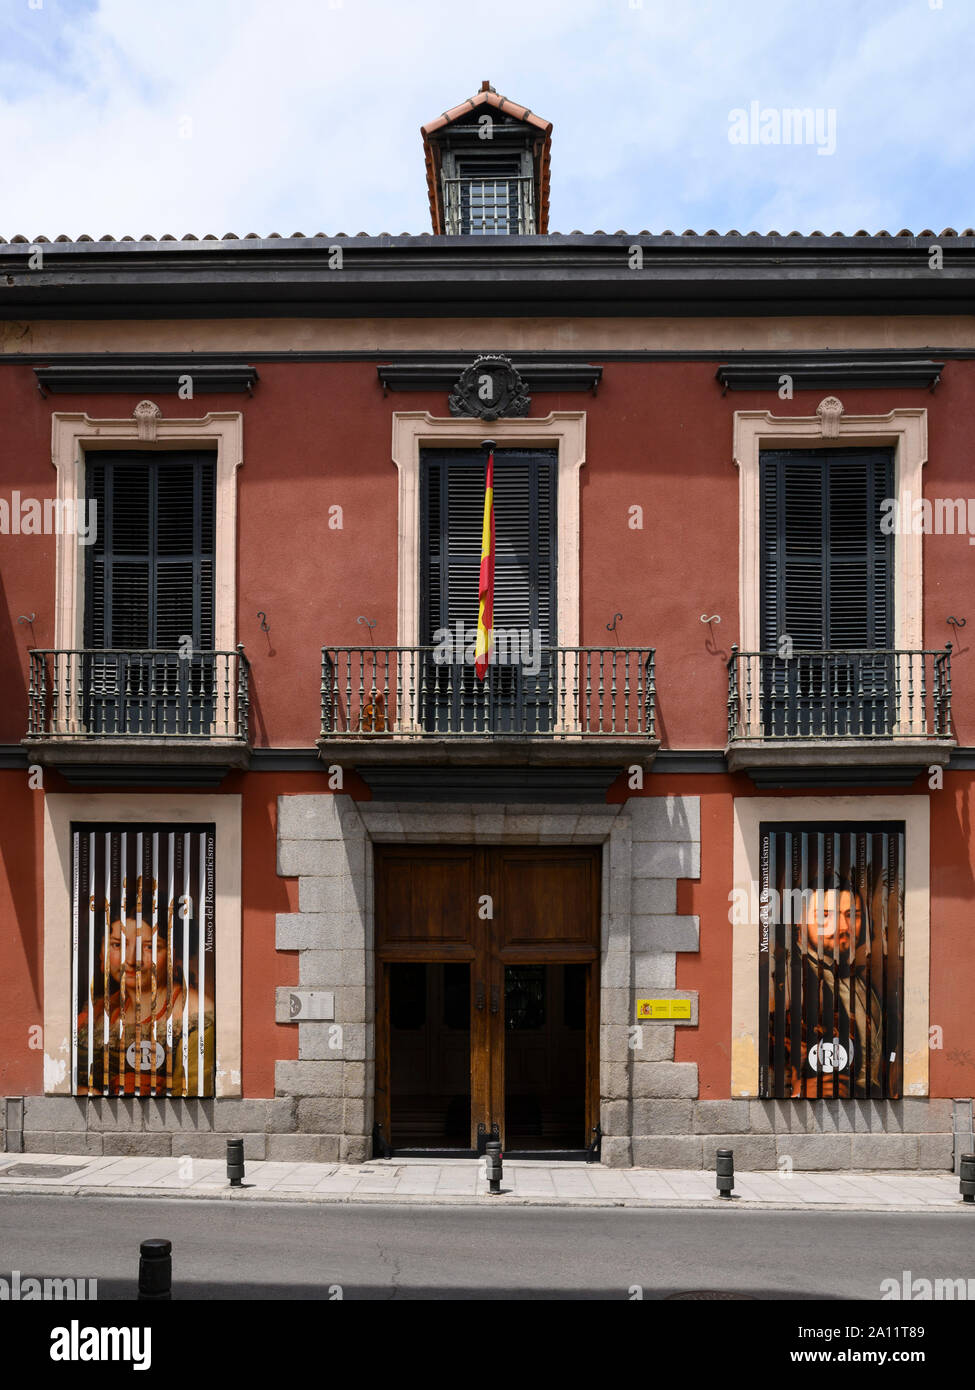 Madrid. Spain. Museo del Romanticismo (Museum of Romanticism), housed in an 18th century neo-classical palace once owned by the Marquis of Matallanare Stock Photo